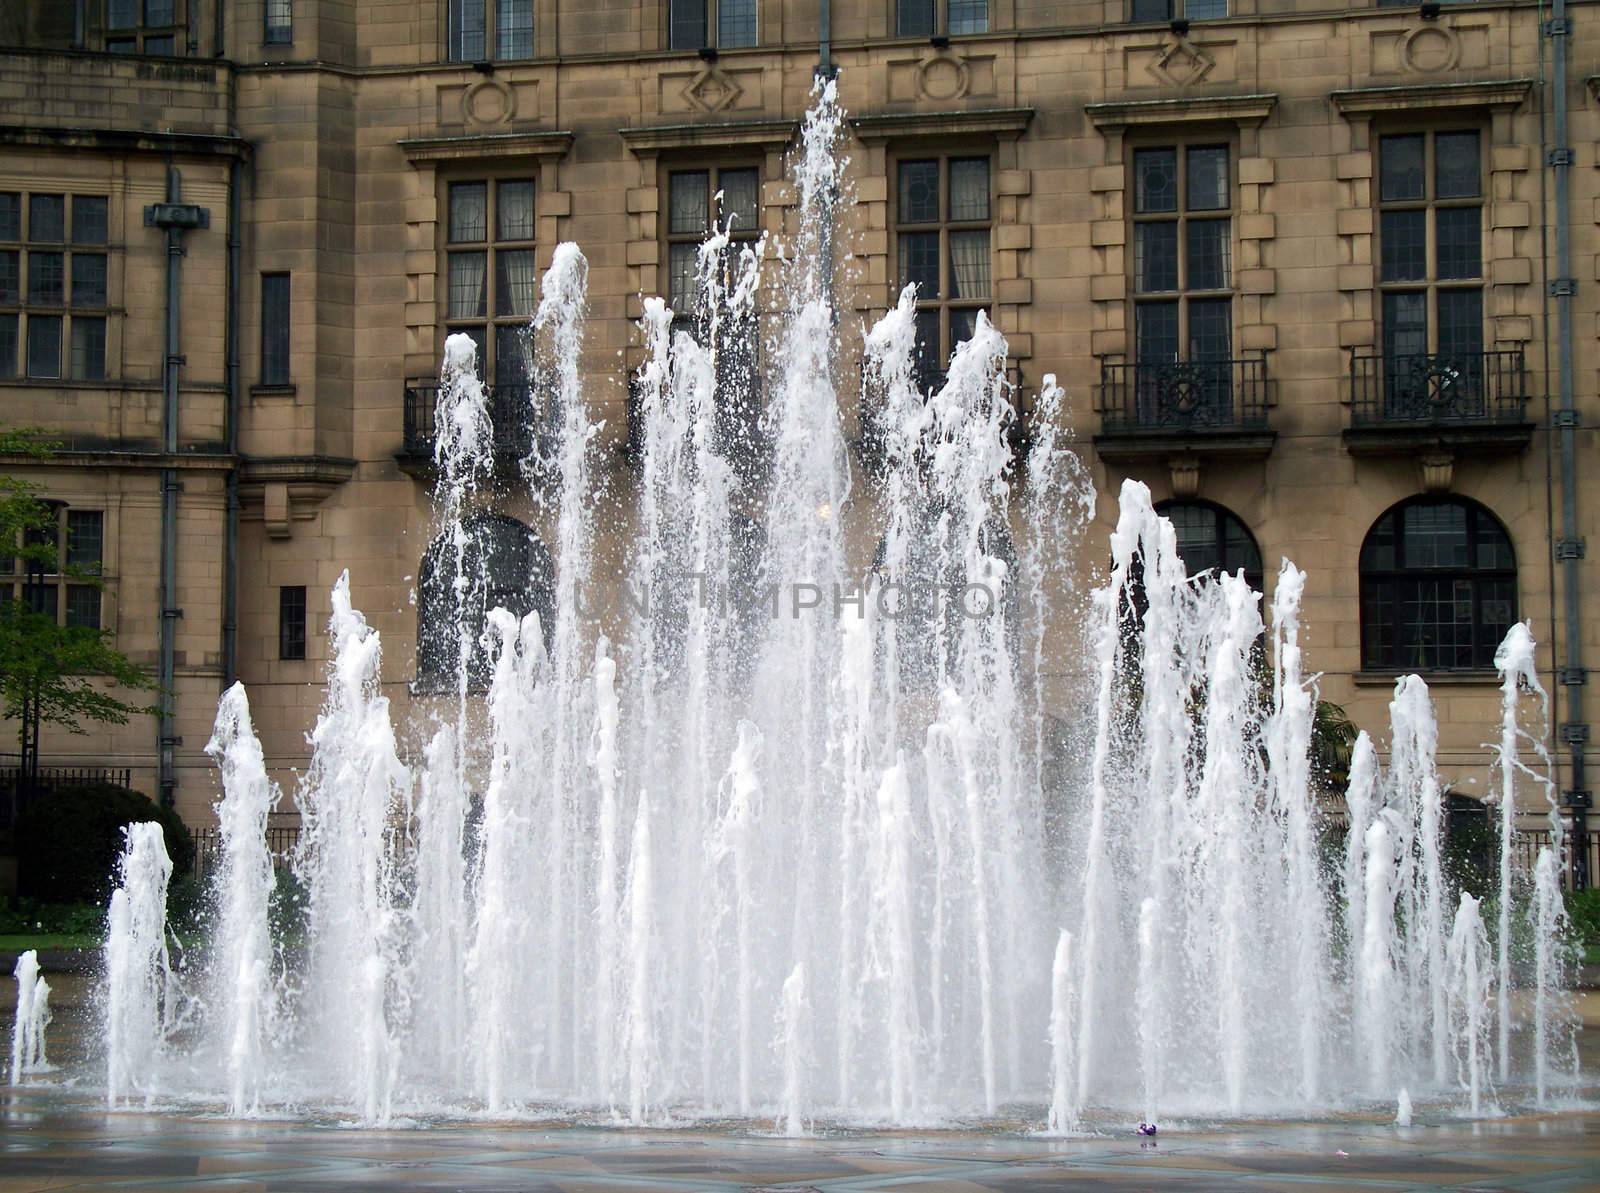 A photograph of water jets in front of the old Town Hall building in Sheffield, England.